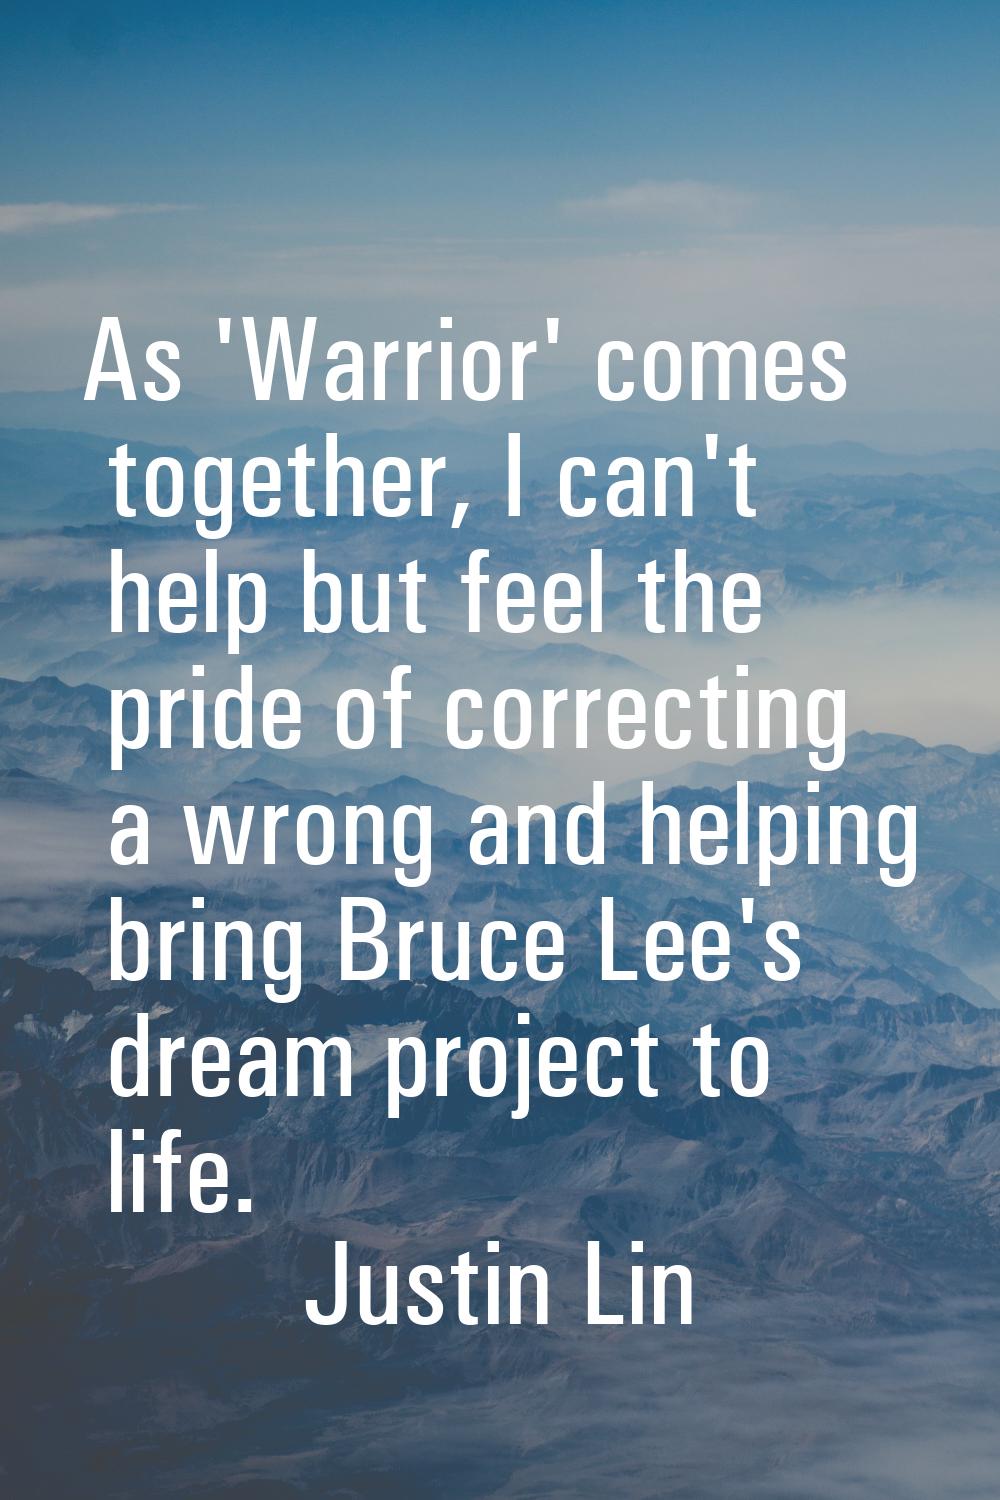 As 'Warrior' comes together, I can't help but feel the pride of correcting a wrong and helping brin